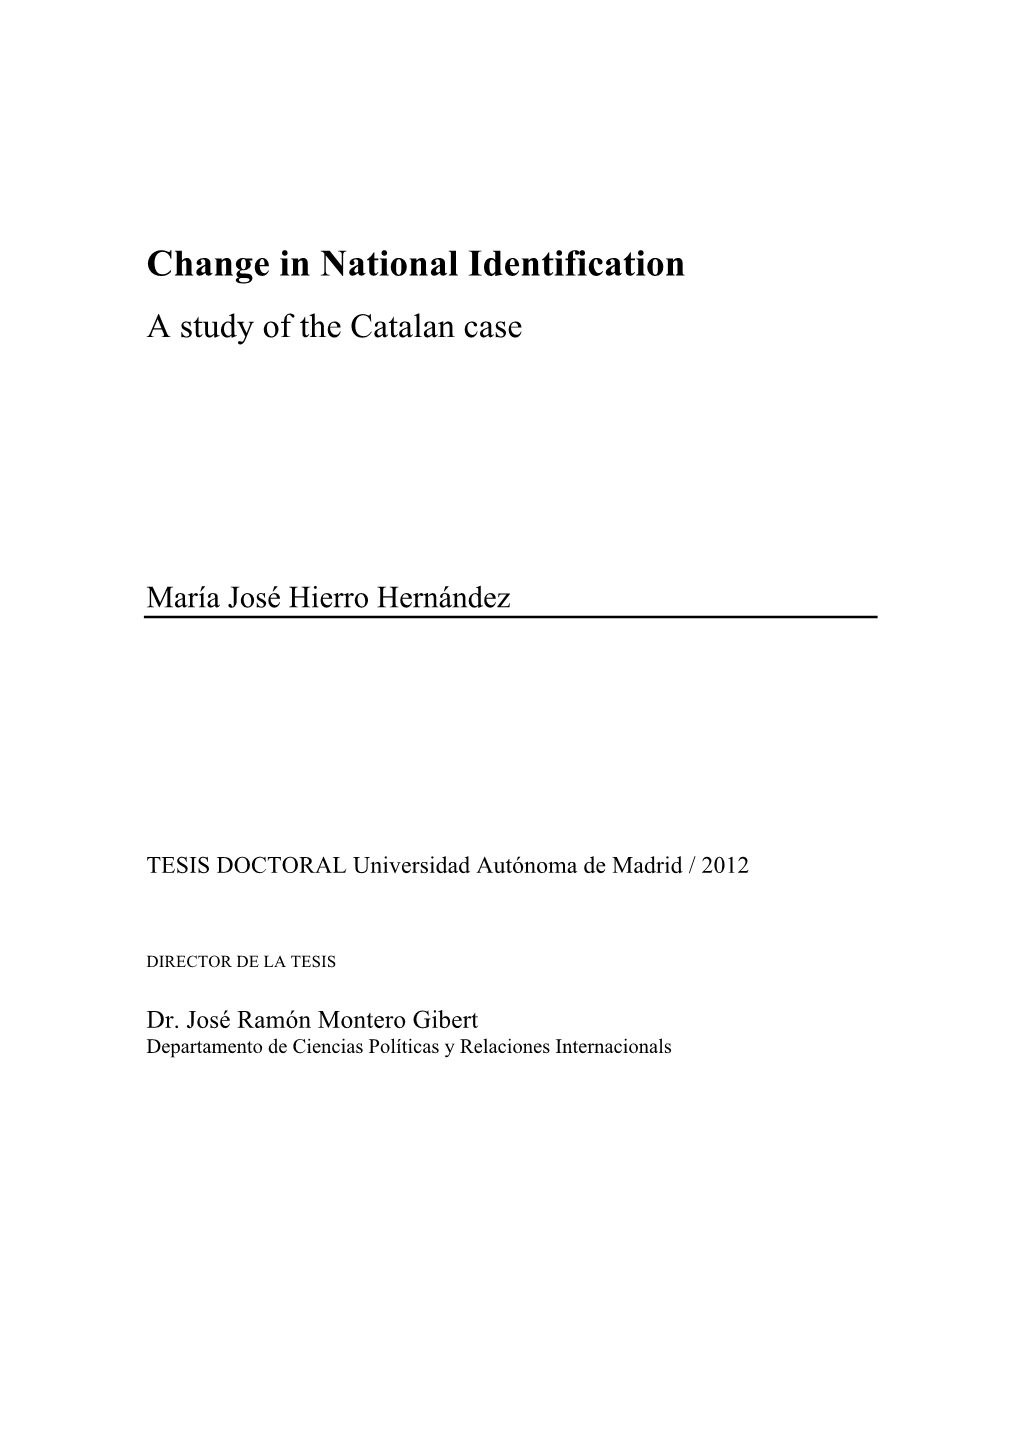 Change in National Identification a Study of the Catalan Case